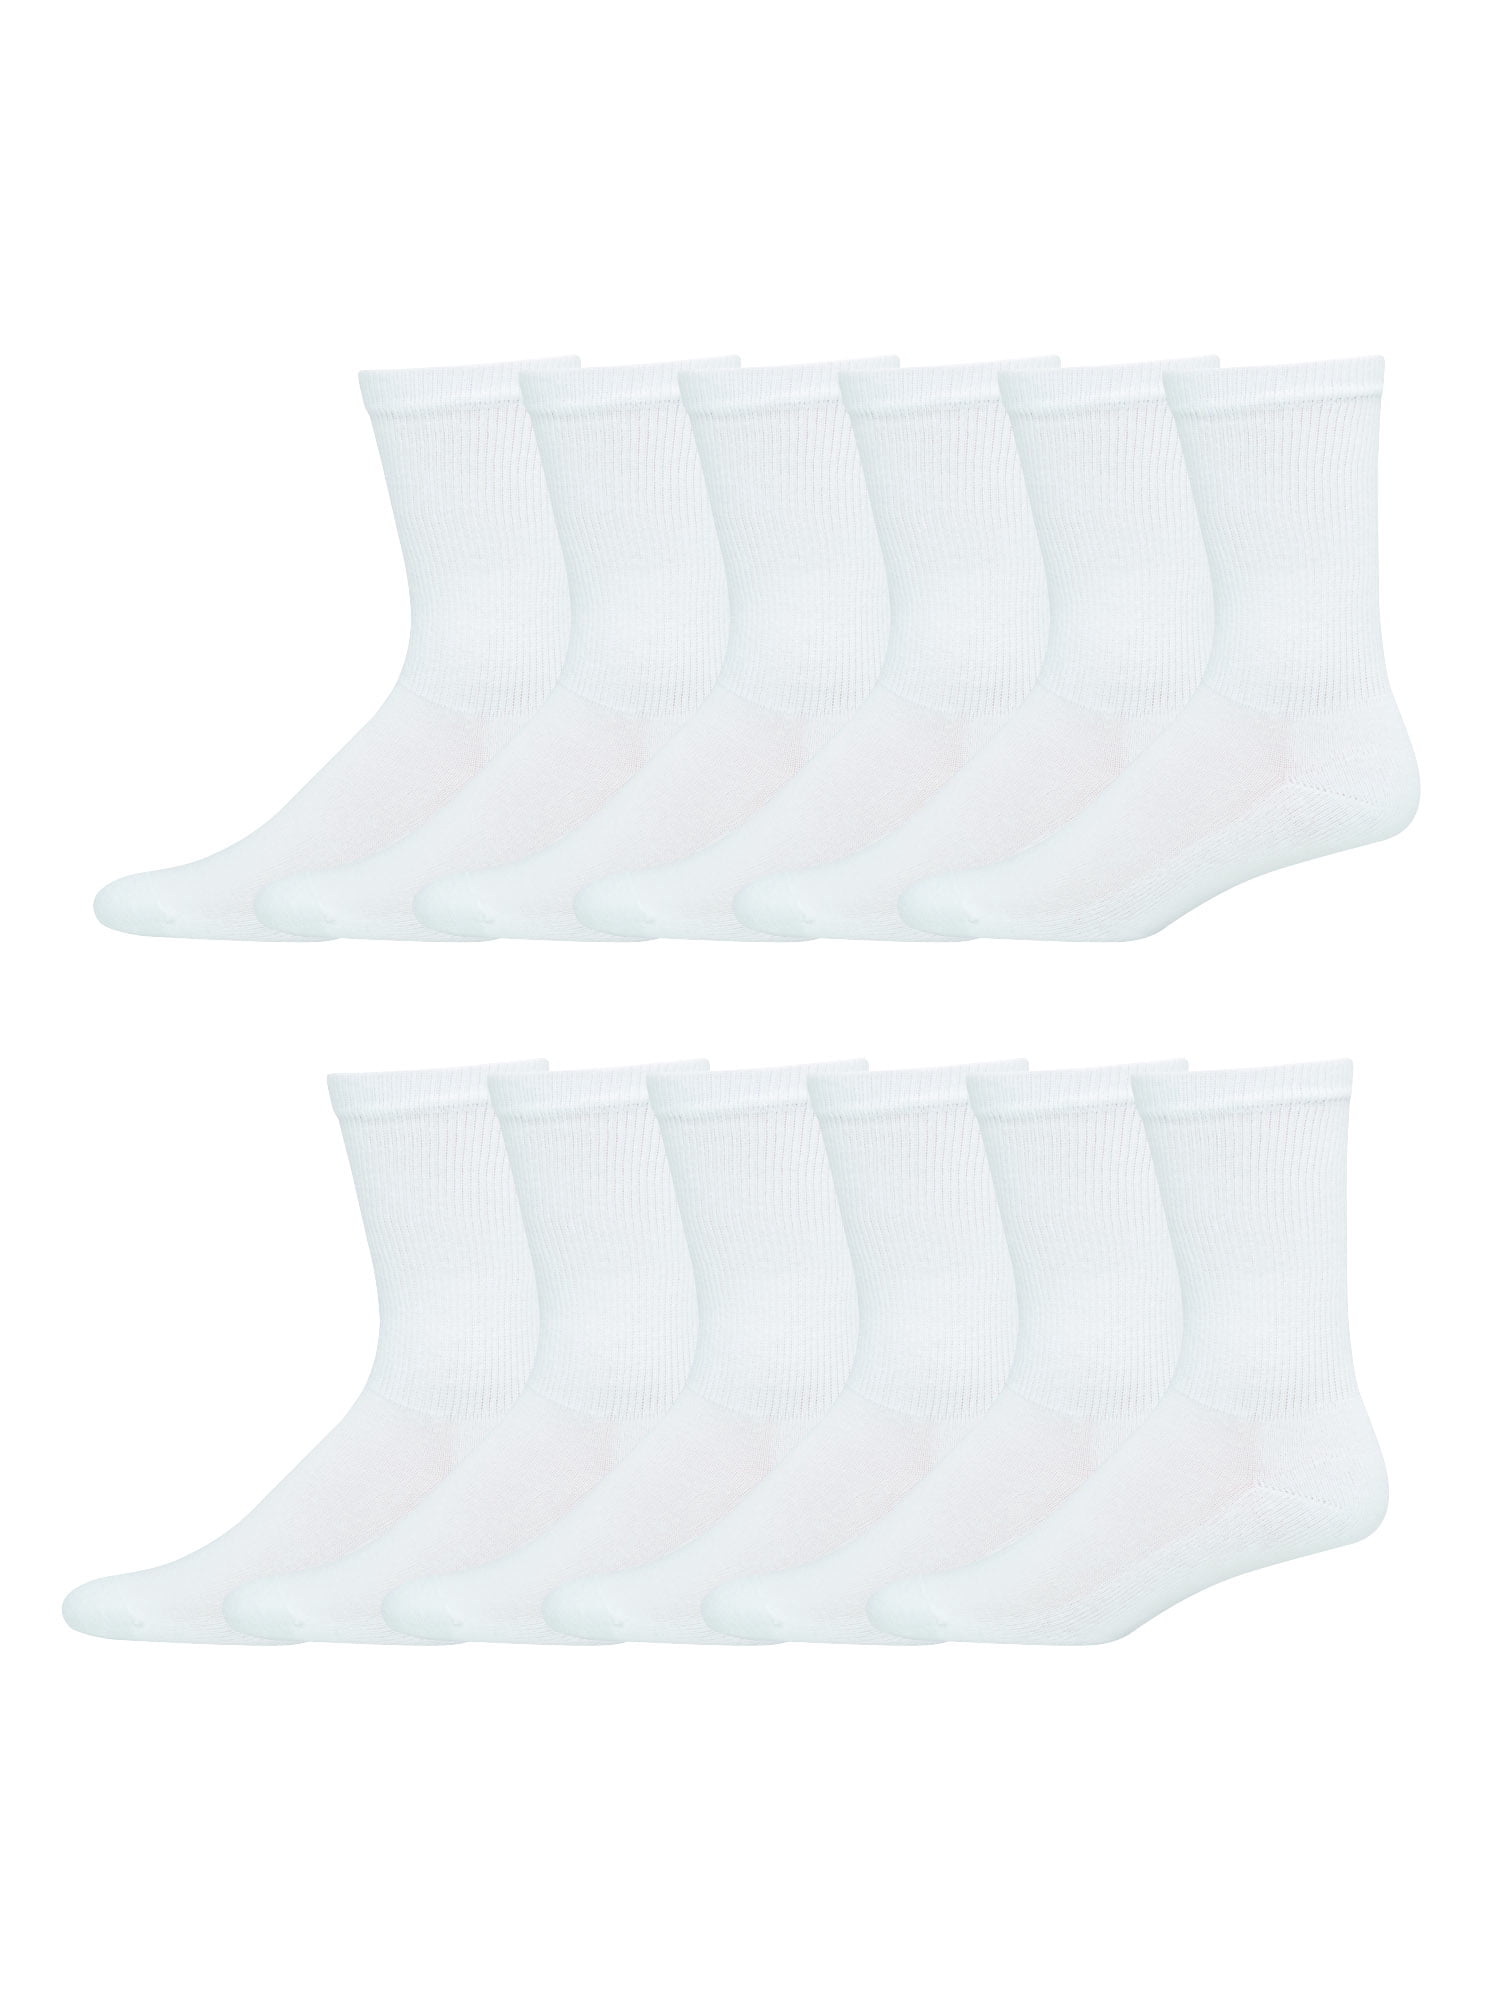 4-Pack Hanes Men's X-Temp Active Cool Ankle Socks ALL SIZES ASSORTED 